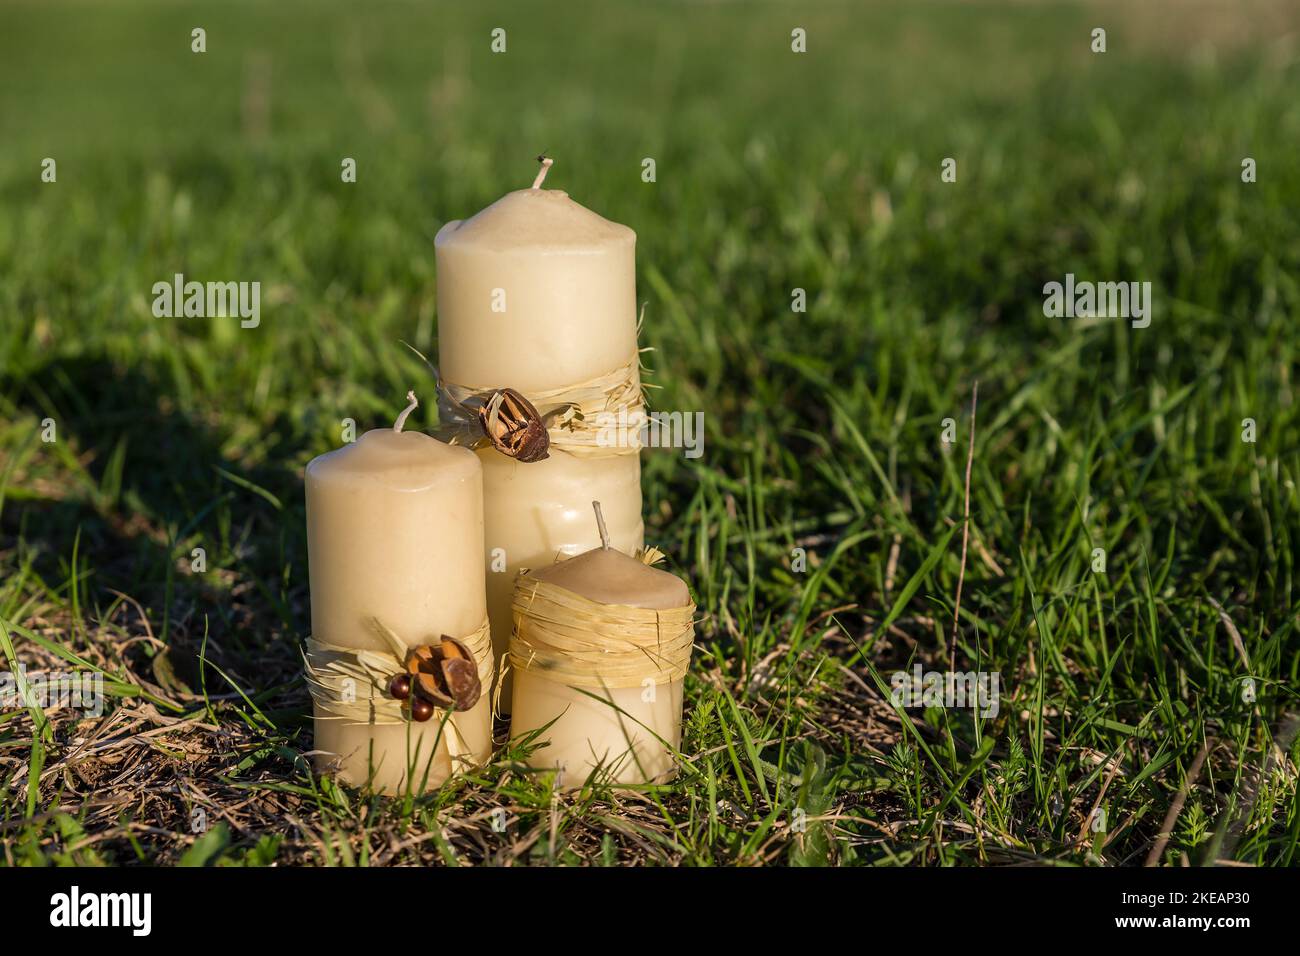 three decorative wax candles on a green lawn Stock Photo